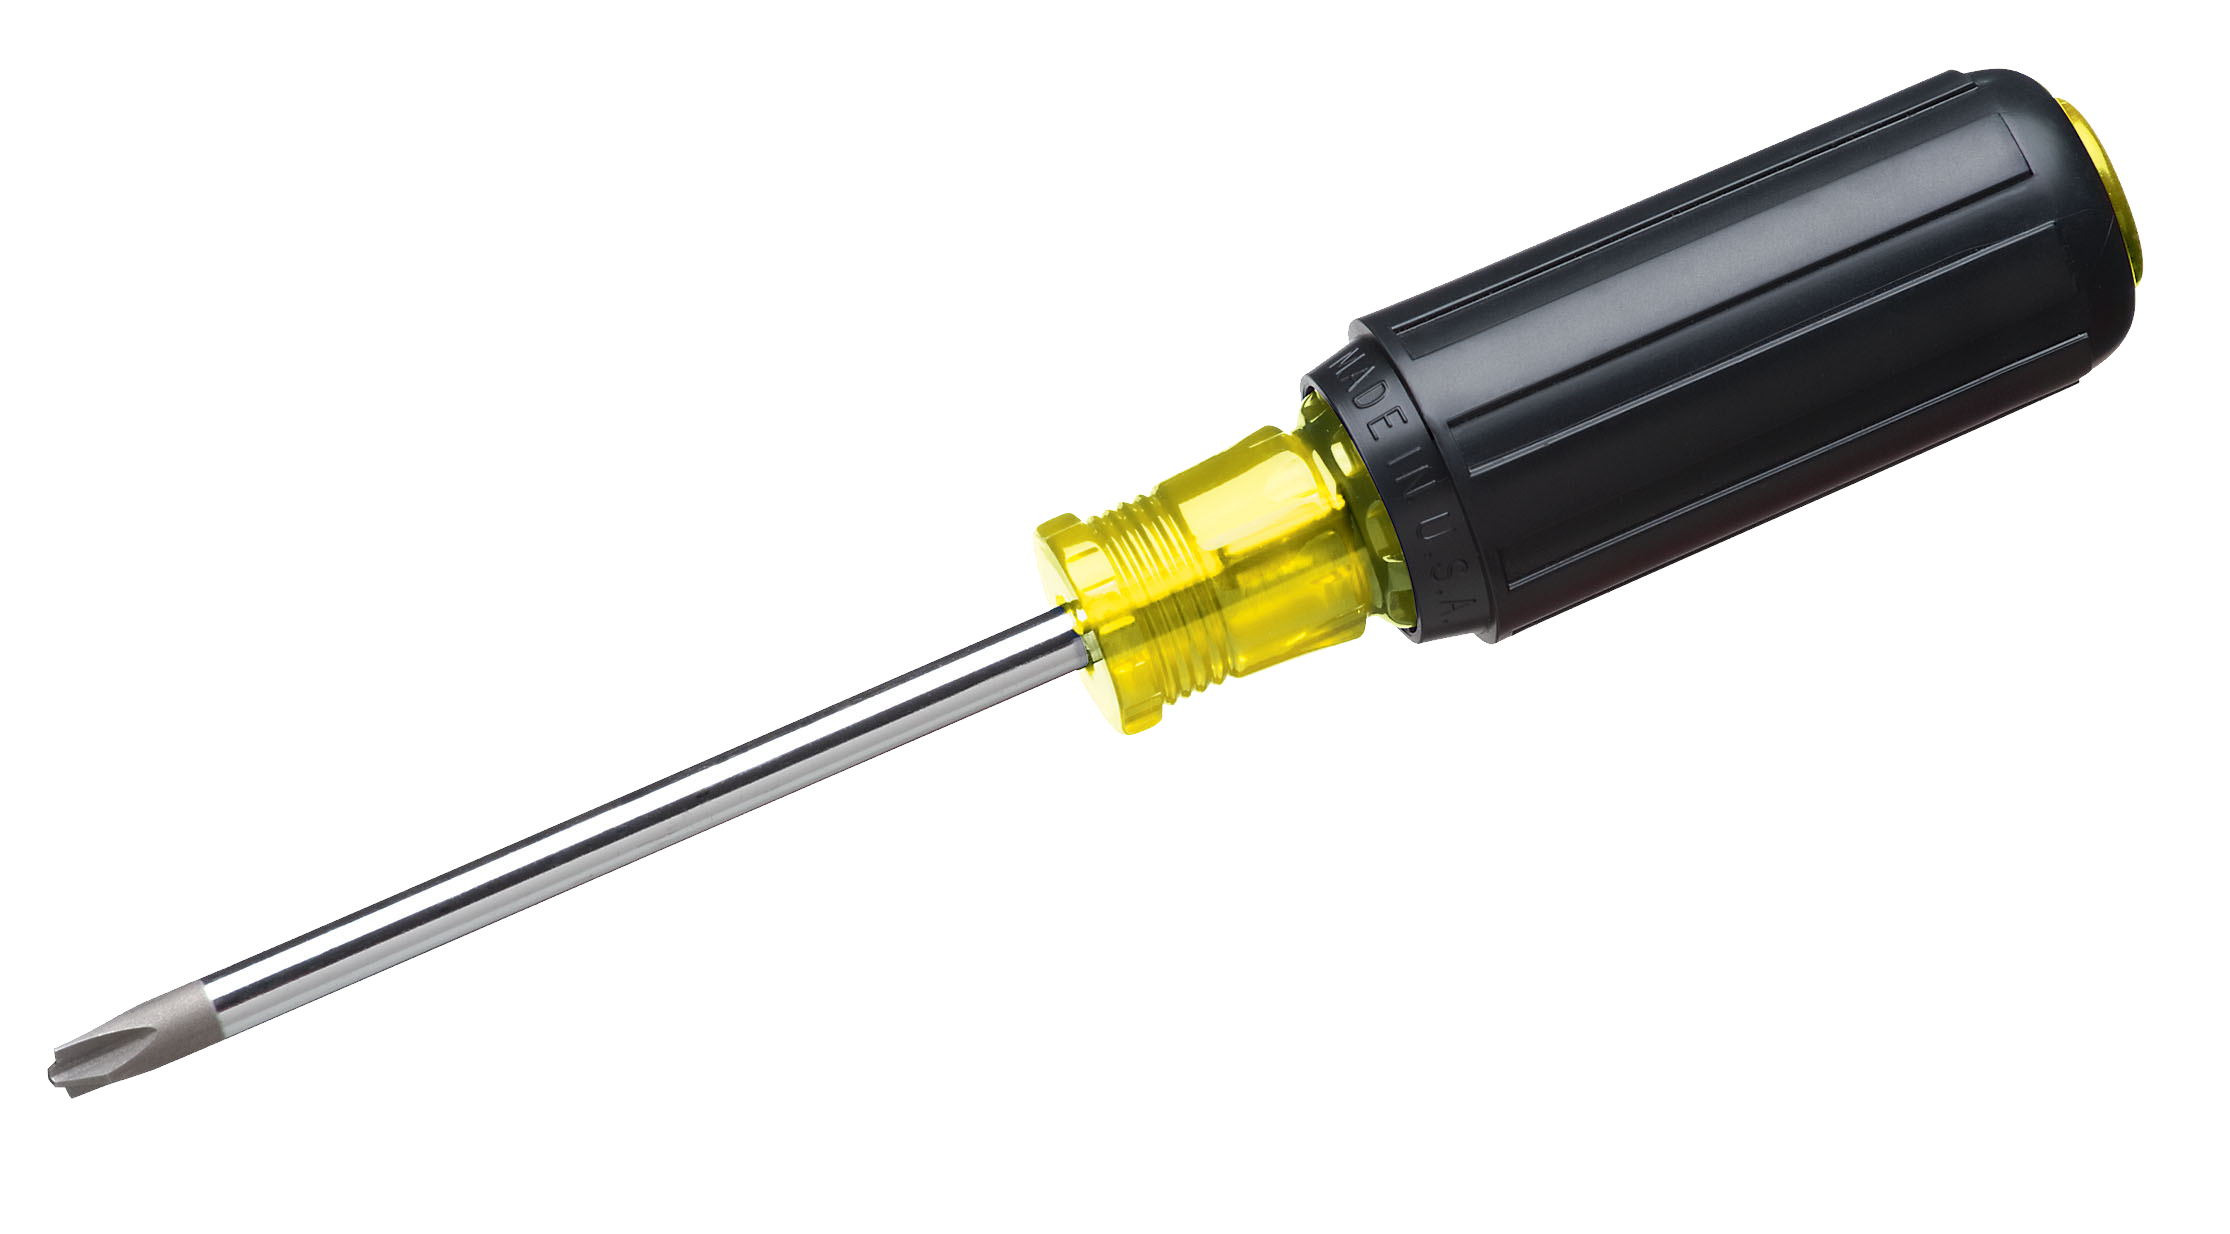 Screwdriver clipart different. Png image tools pinterest